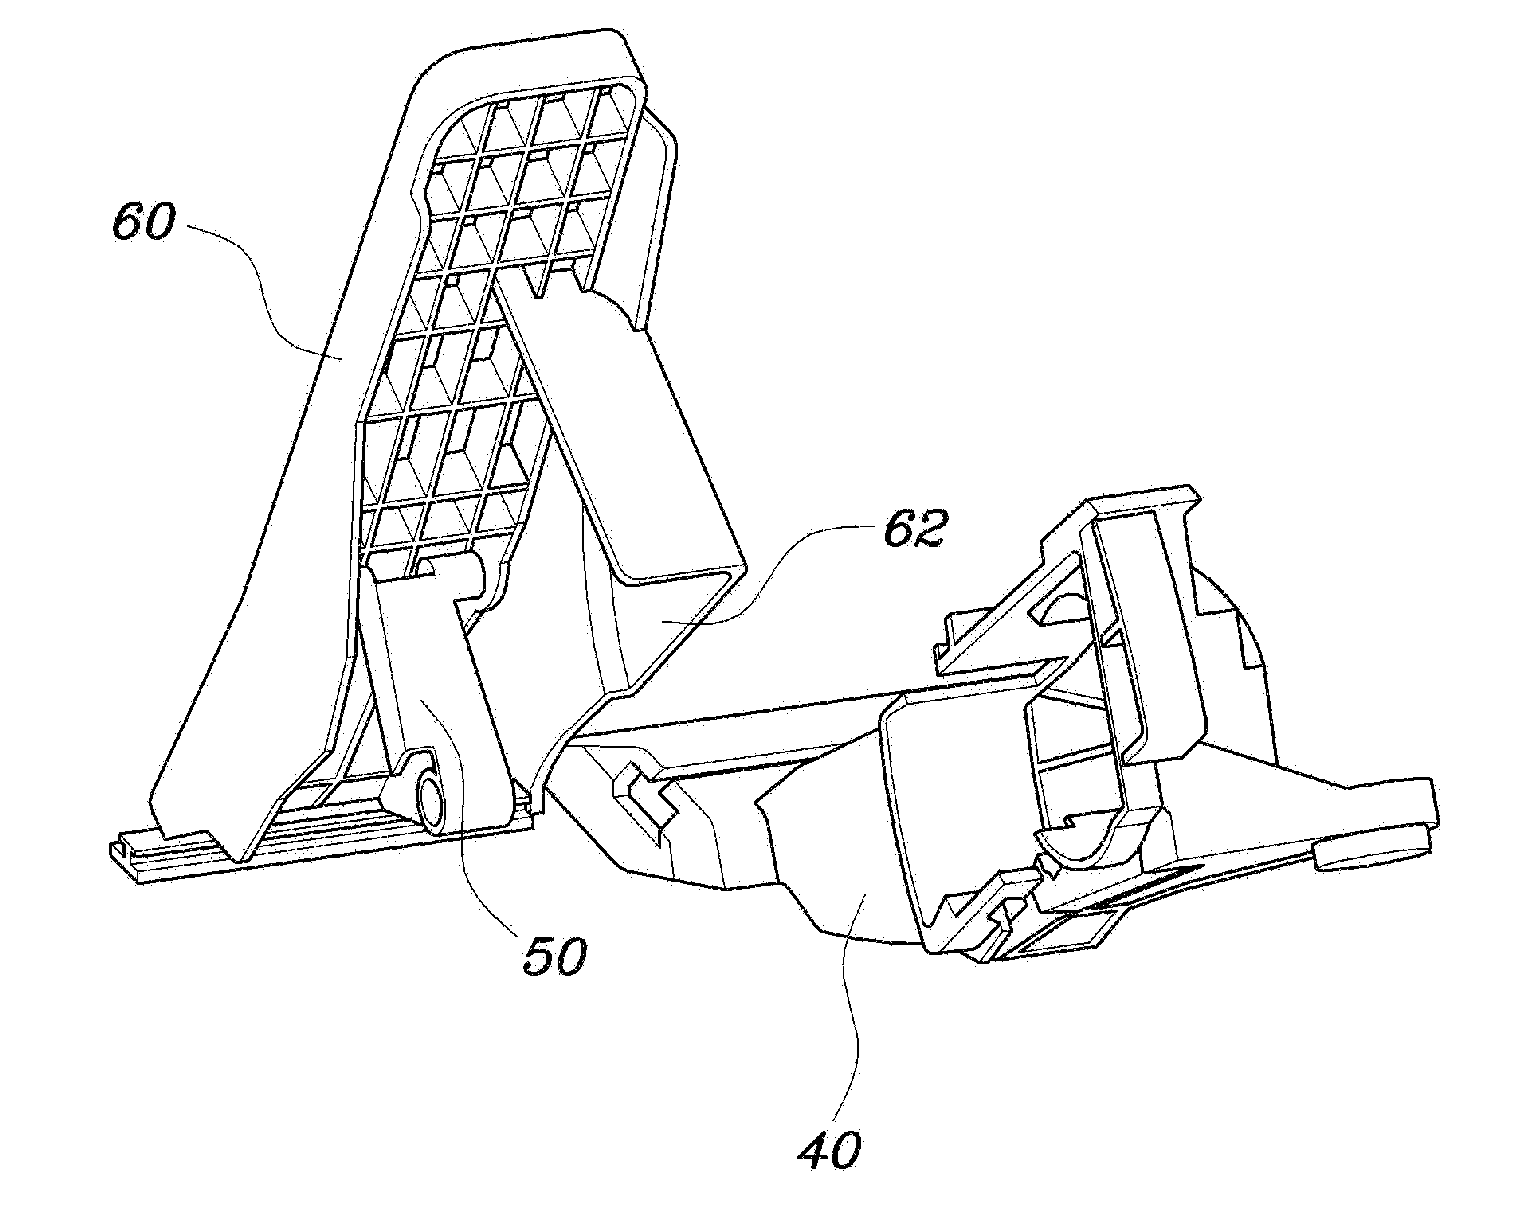 Pedal device for vehicles